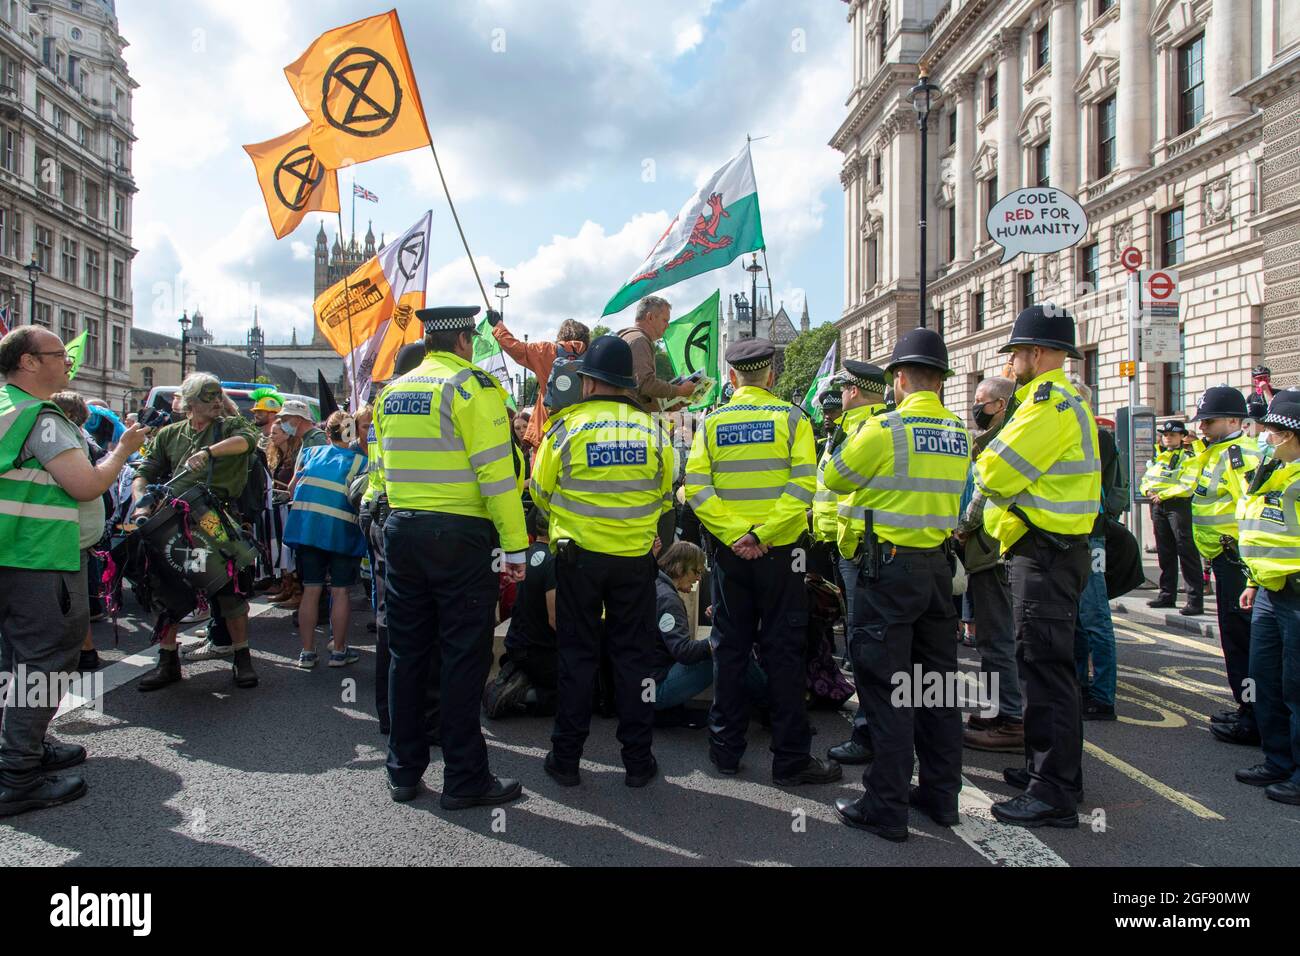 London, UK. 24th Aug, 2021. Police seen as Extinction Rebellion XR Cymru Action holds a protest against climate change, global warming, which plans to target the root cause of the climate and ecological crisis and to demand the government divest from fossil fuel companies. (Photo by Dave Rushen/SOPA Images/Sipa USA) Credit: Sipa USA/Alamy Live News Stock Photo